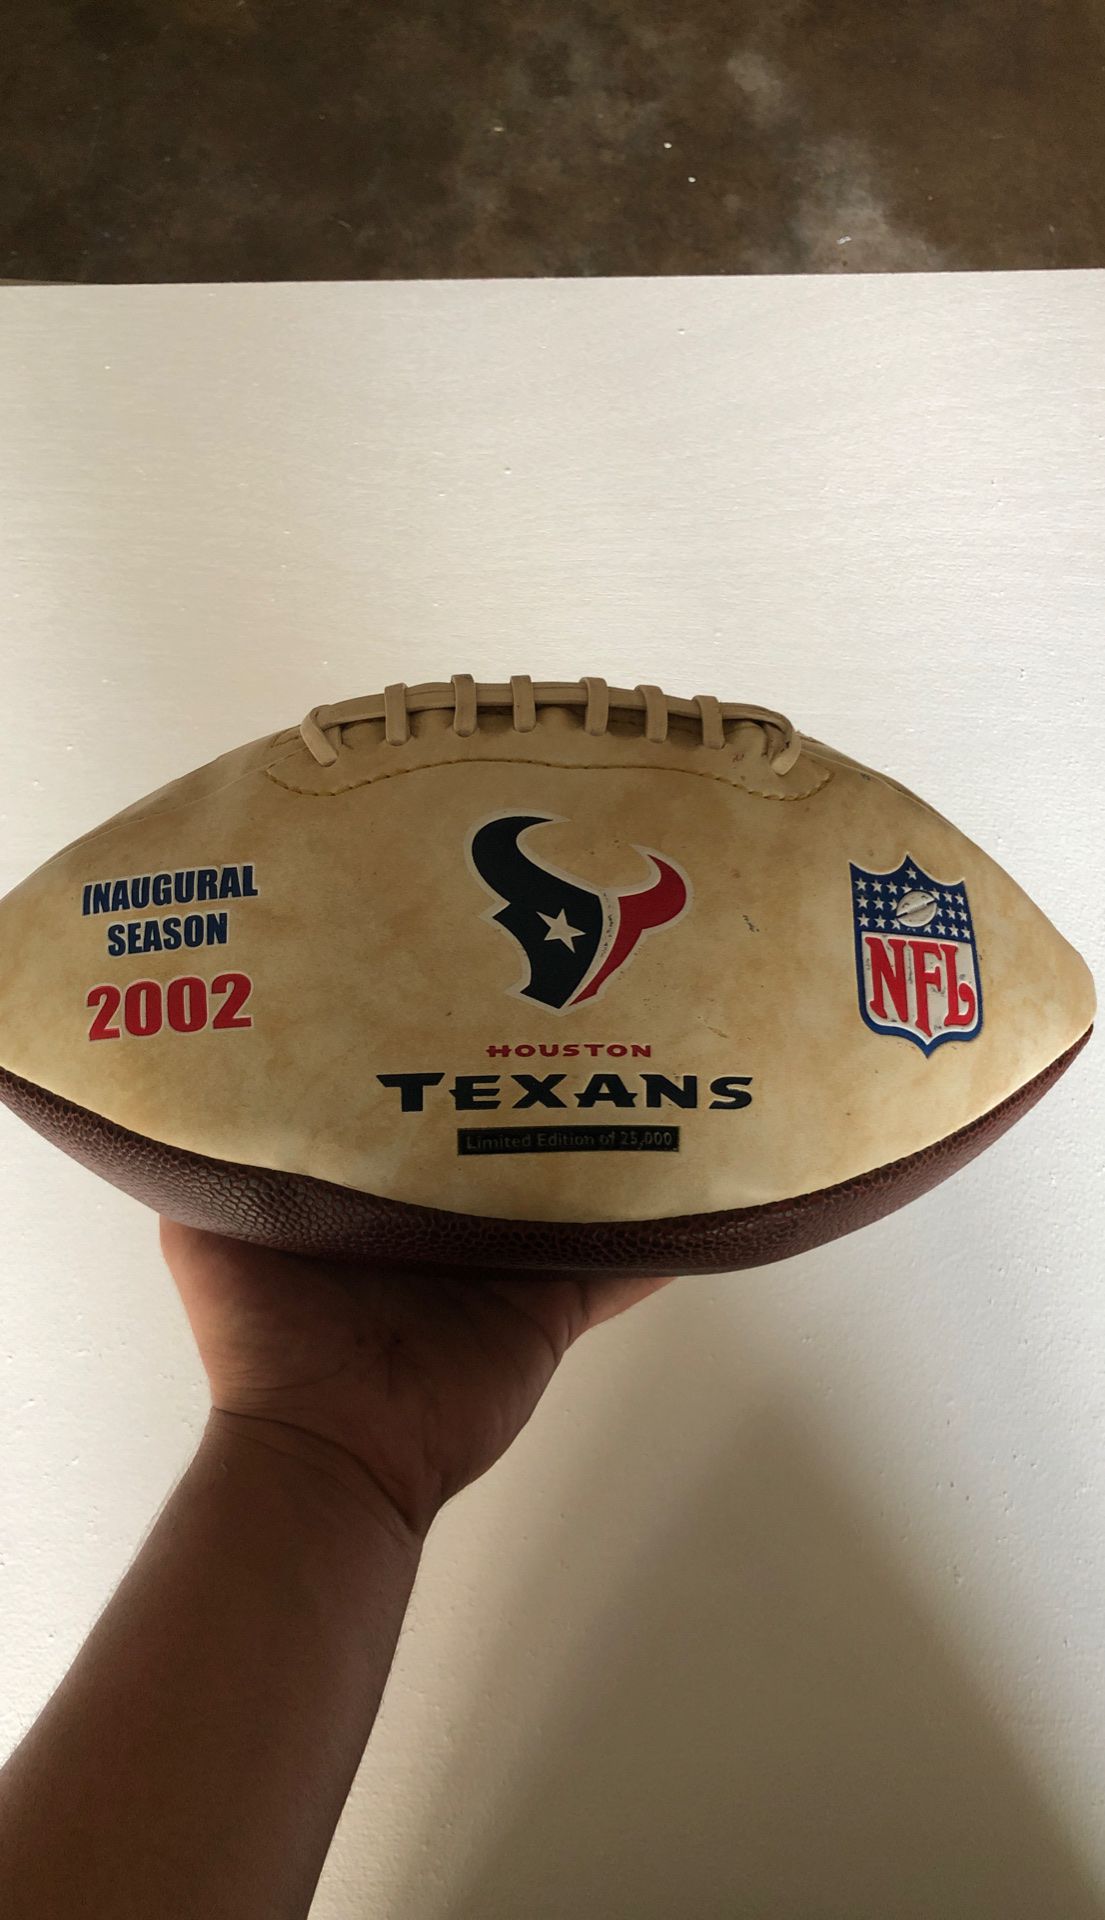 Houston Texans inaugural season autographed football for Sale in Houston,  TX - OfferUp